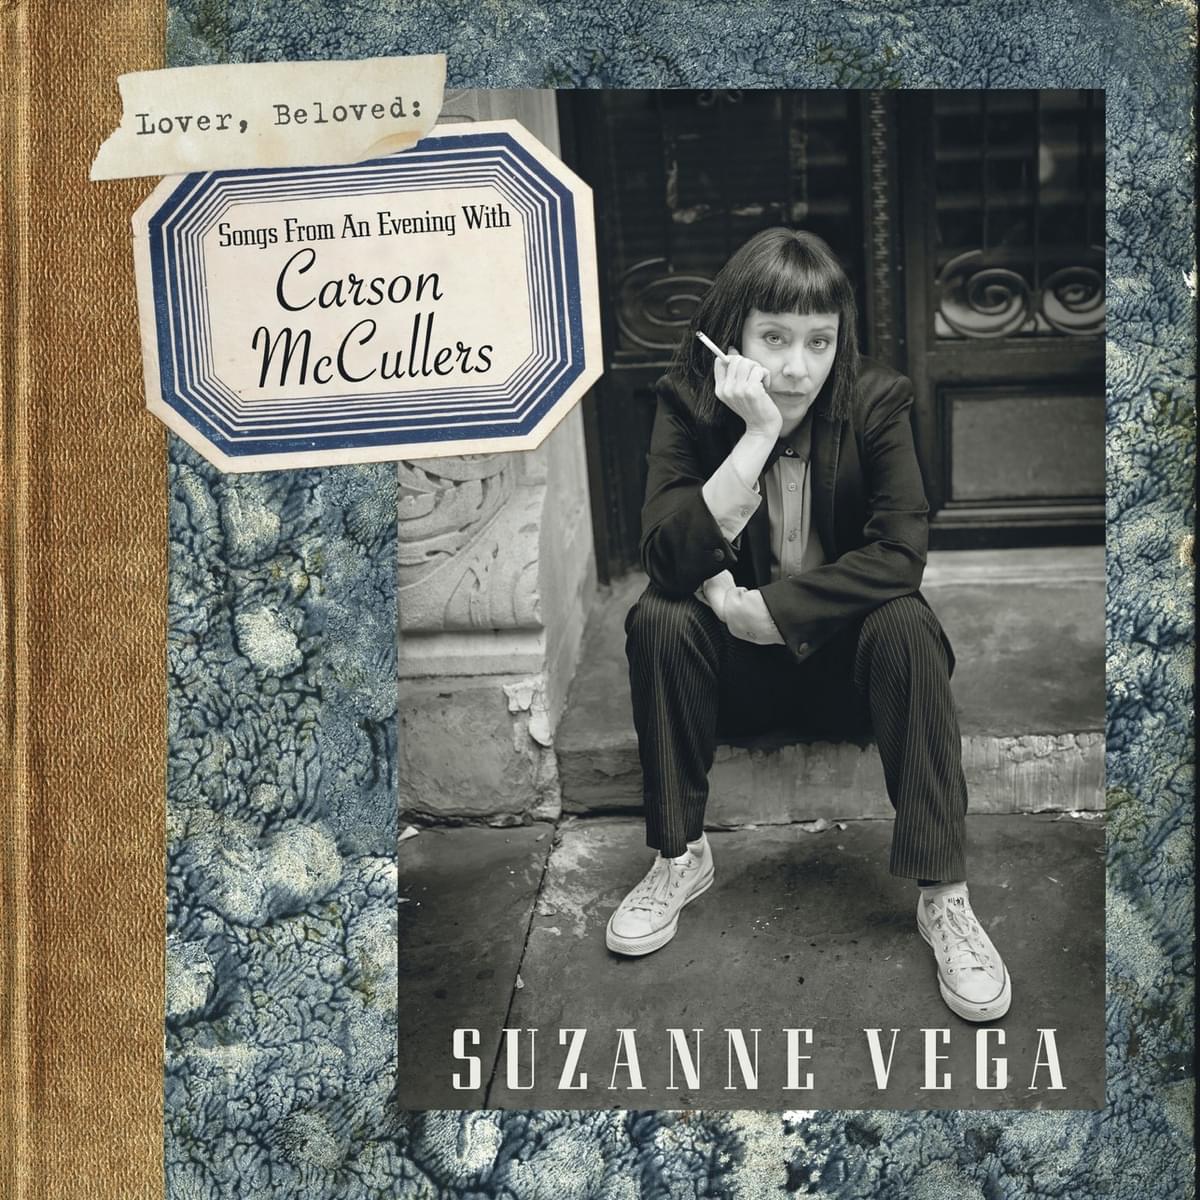 Cover of Suzanne Vegas 2014 album Lover Beloved